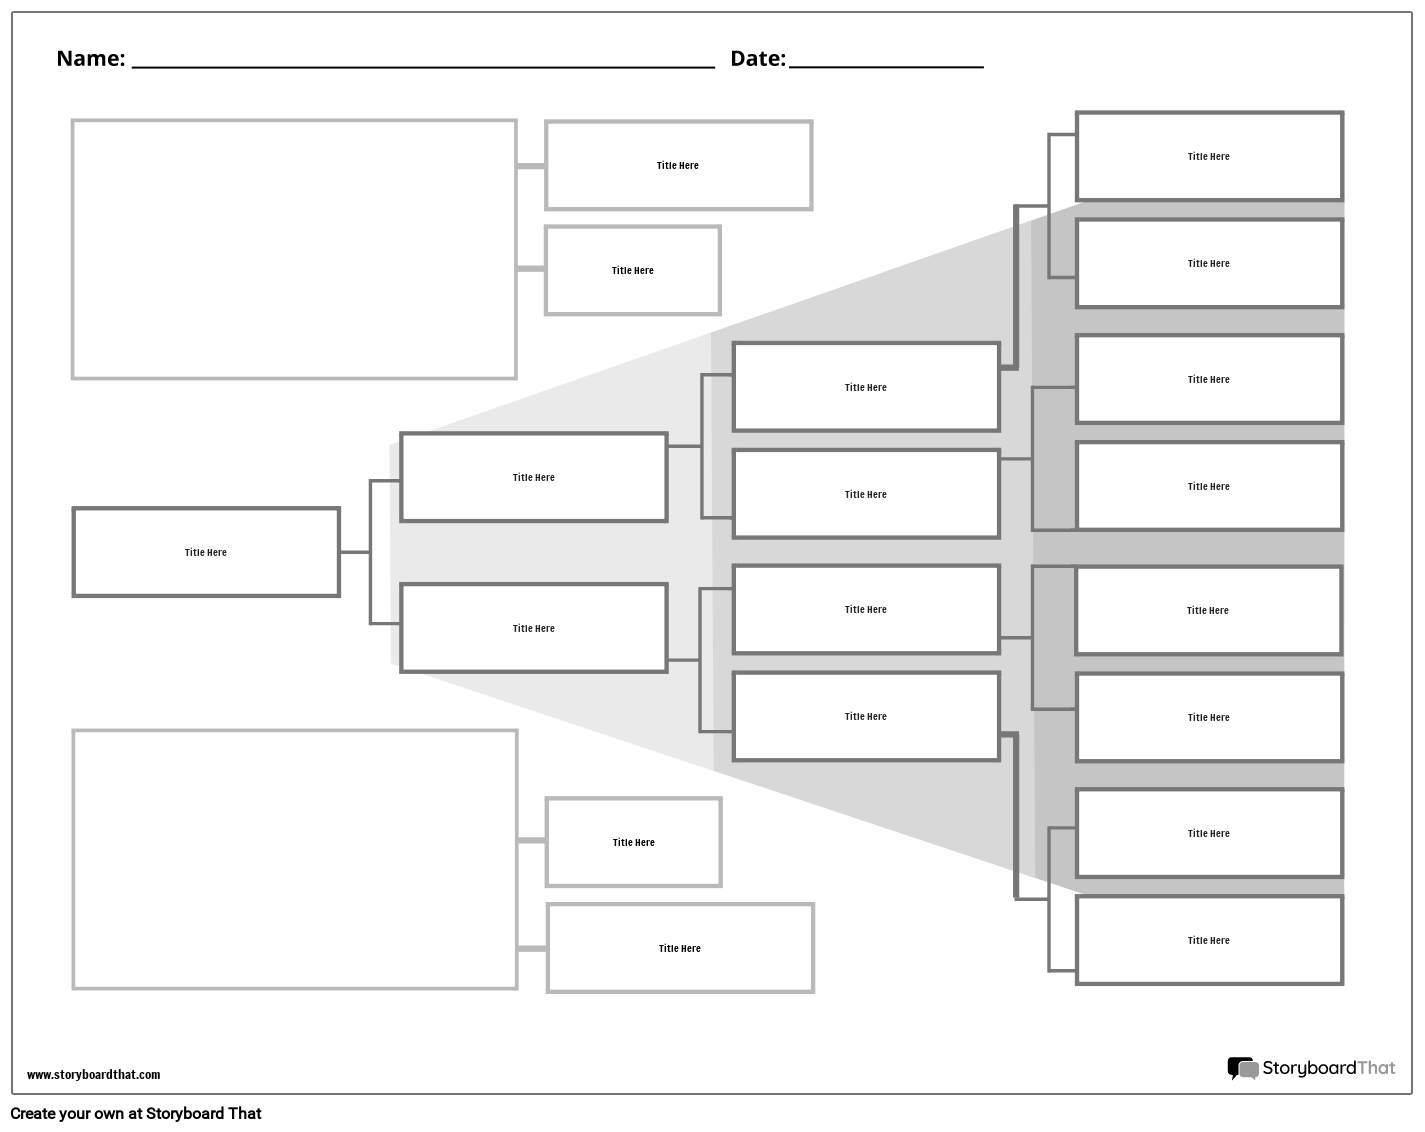 New Create Page Tree Diagram Template 1 (Black & White)